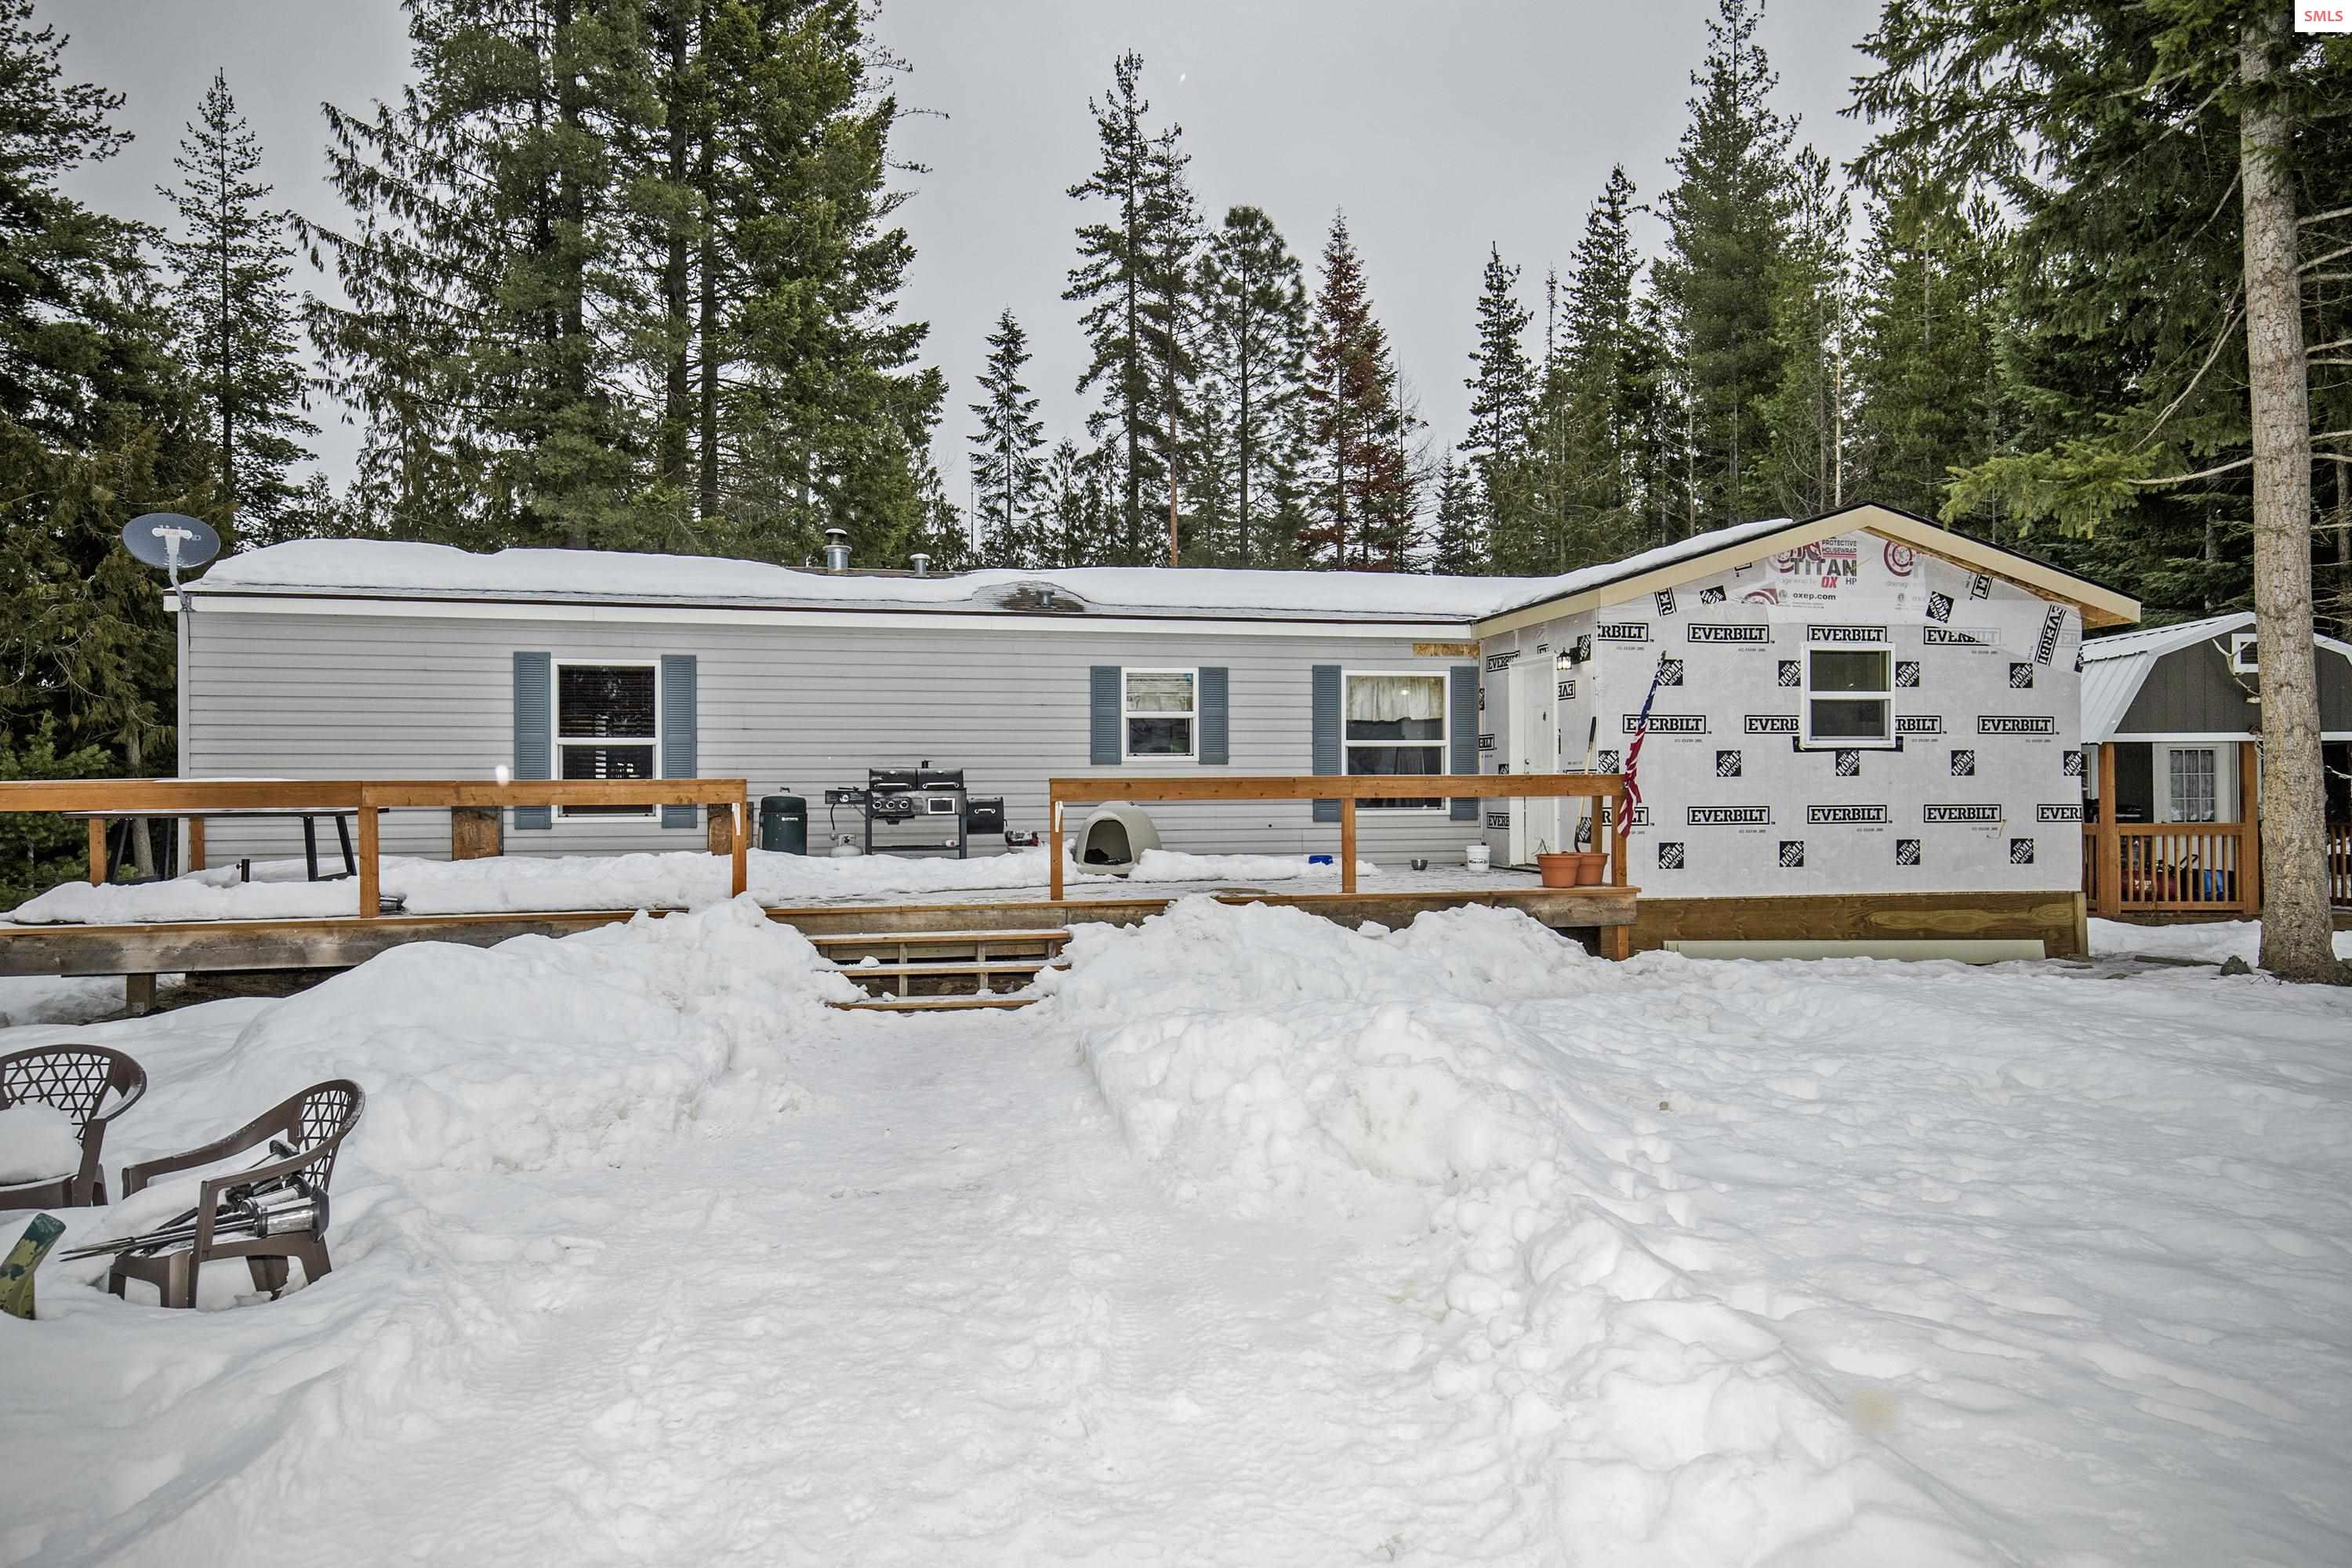 Six prime acres in Sagle!  Two bedroom two Bath home with a great producing well looking for its new owner.  Only a short Drive to Sandpoint and close to Highway 95 for your trip to CDA, ID.  Finish the exterior of the mudroom, install your flavor of trim for the windows and make this your home.